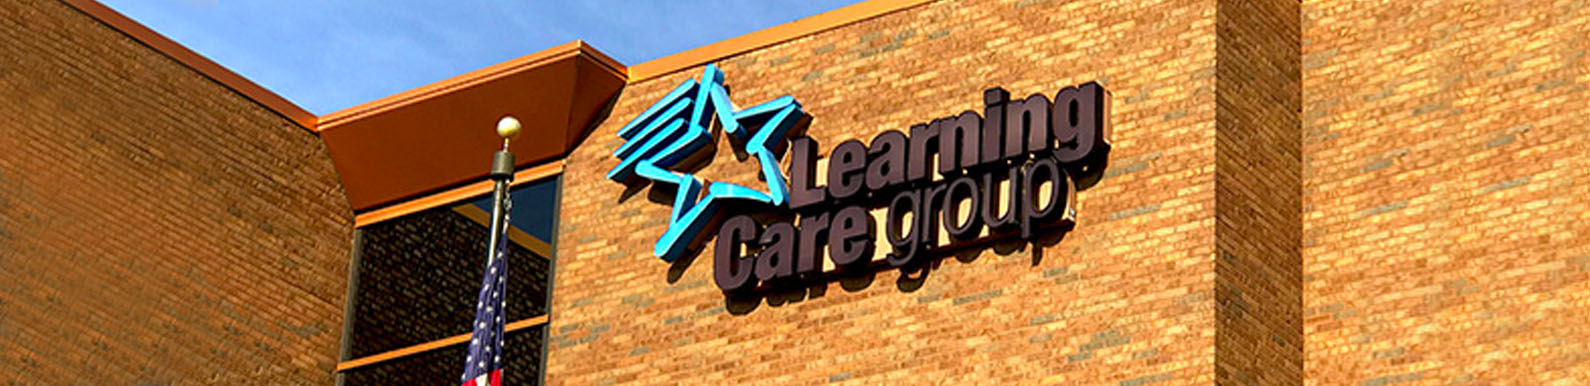 Corporate careers at Learning Care Group